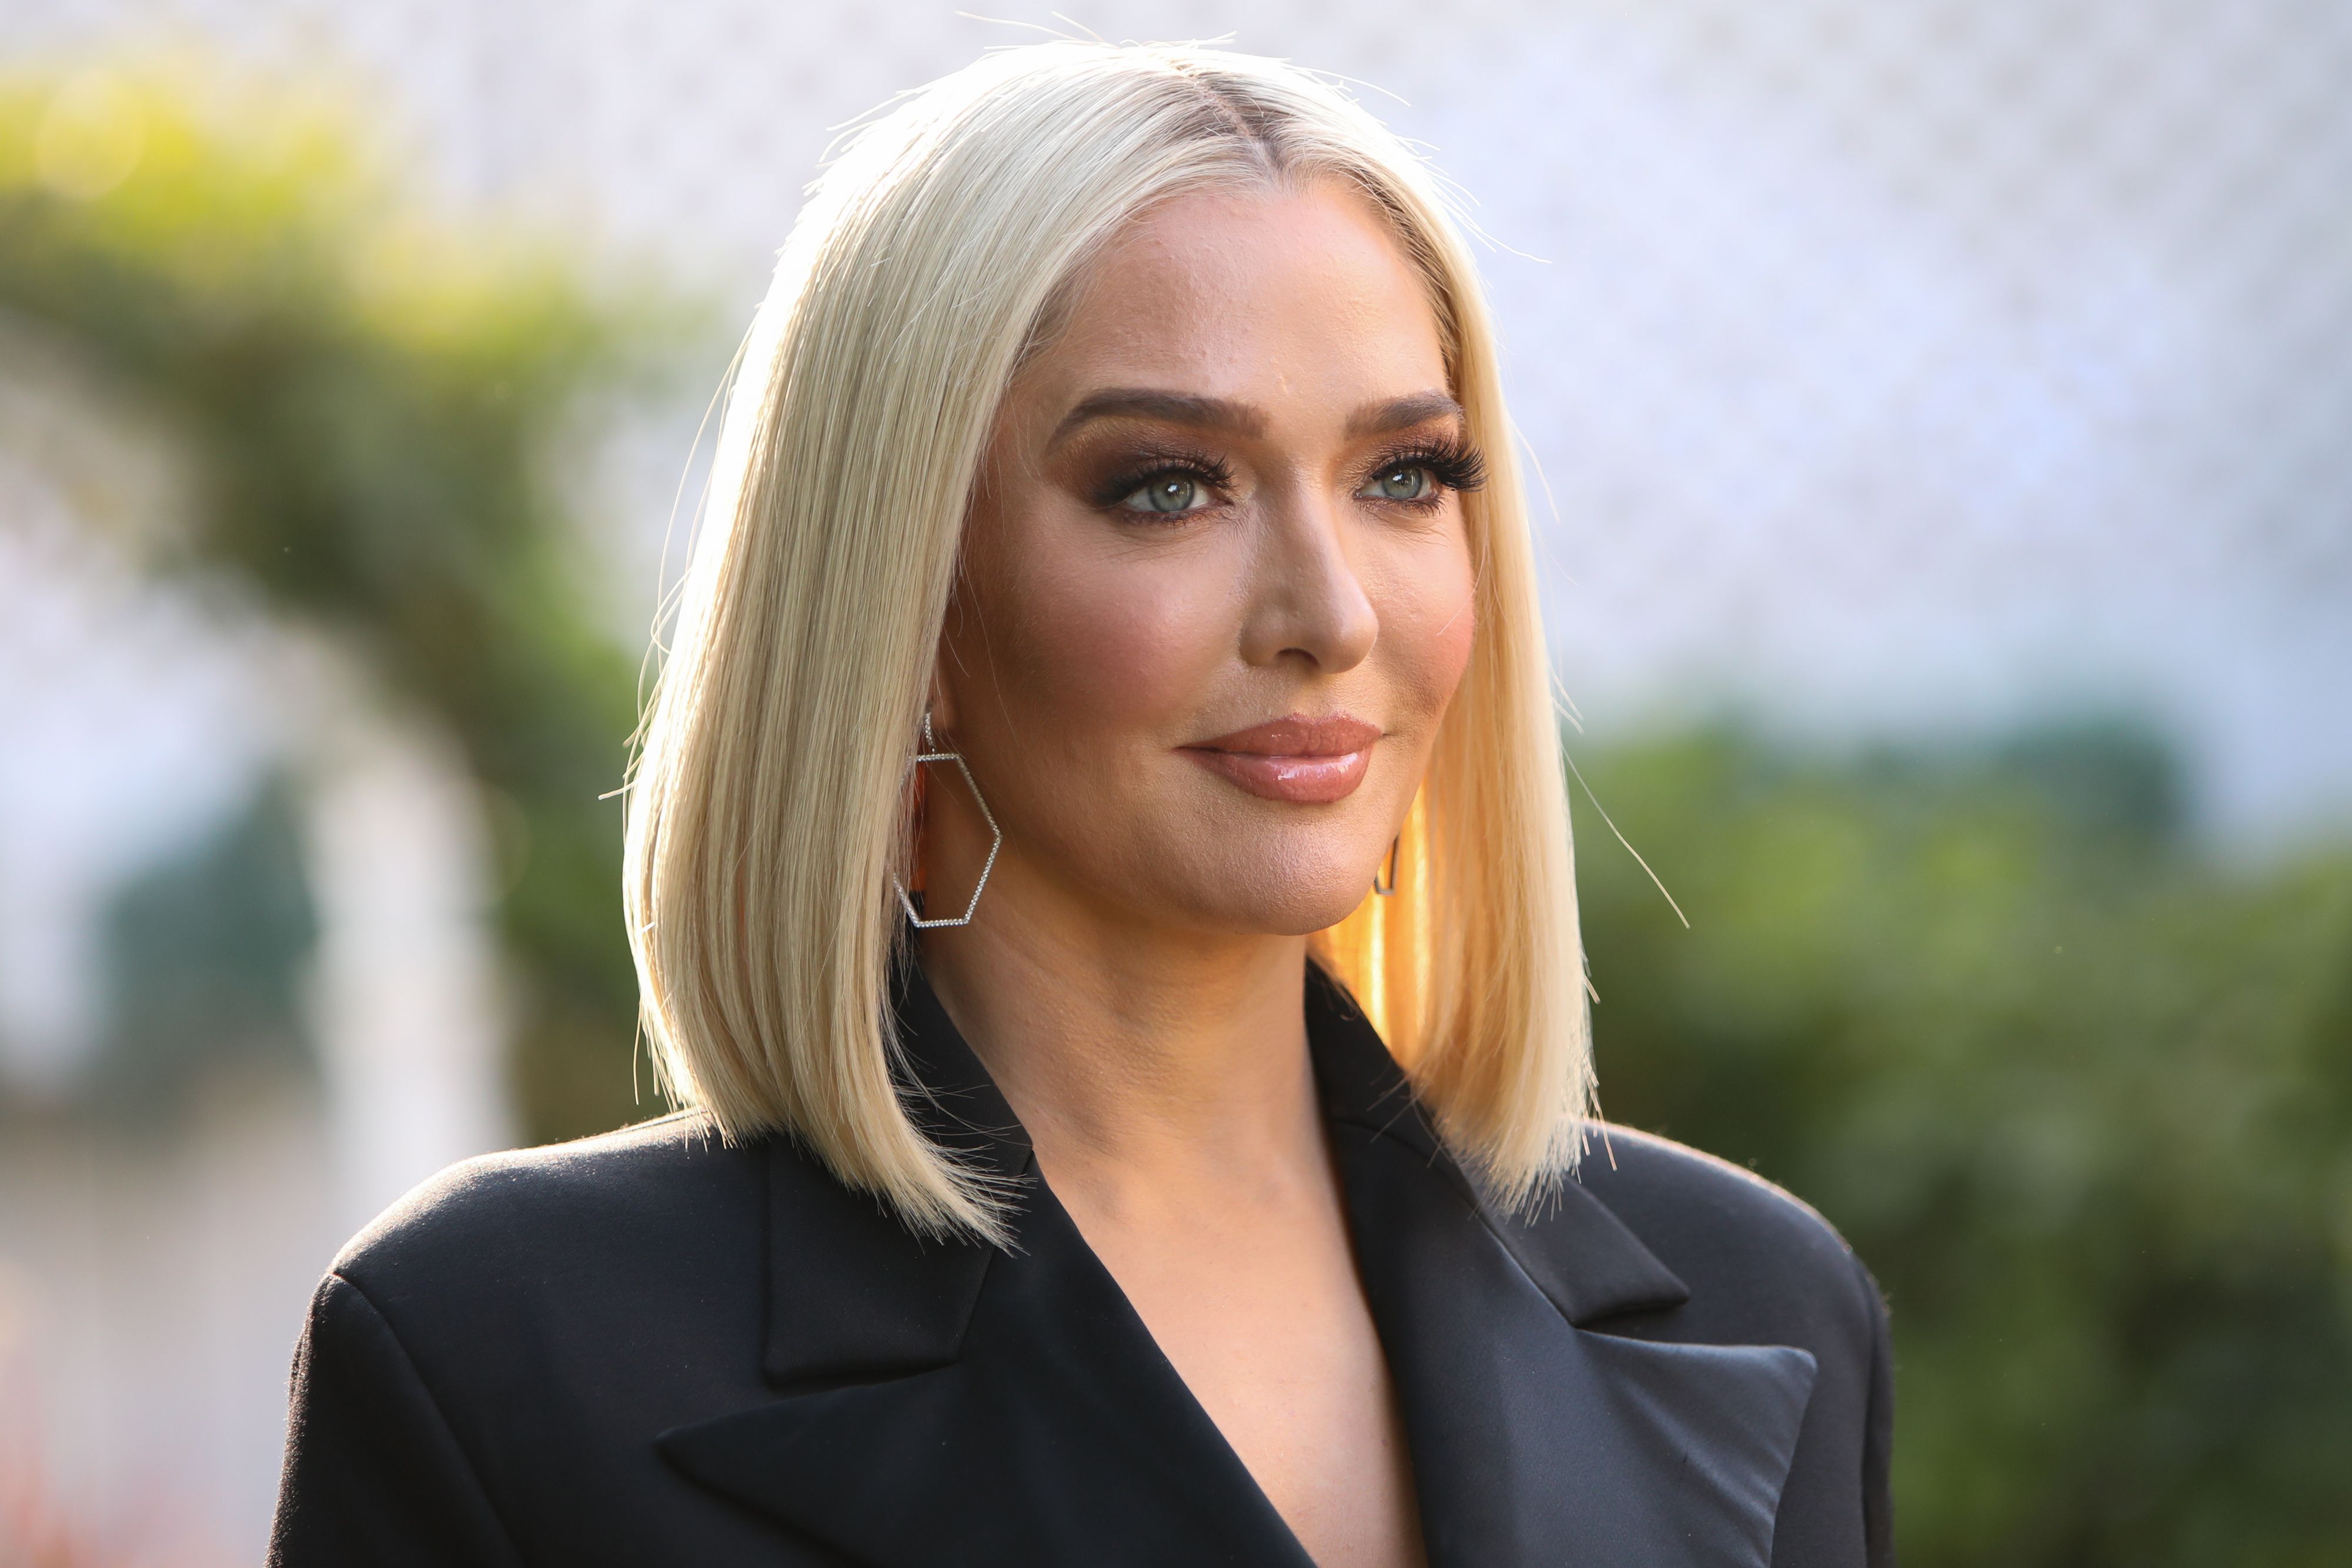 Erika Jayne visits Hallmark Channel's "Home & Family" at Universal Studios Hollywood on November 11, 2019, in Universal City, California | Photo: Getty Images